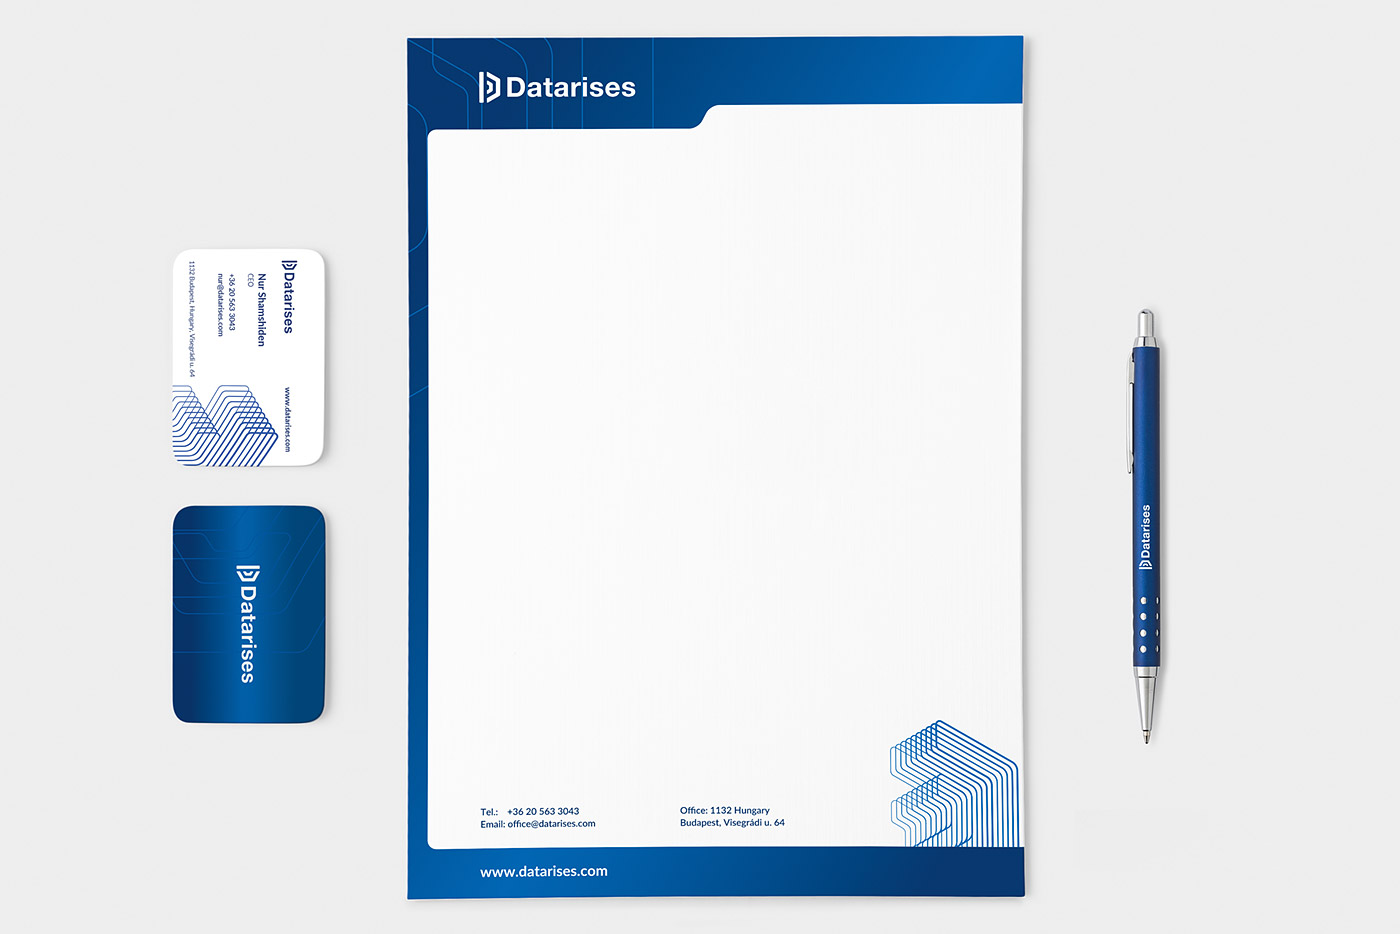 Marketing Collateral for Datarises IT Consulting